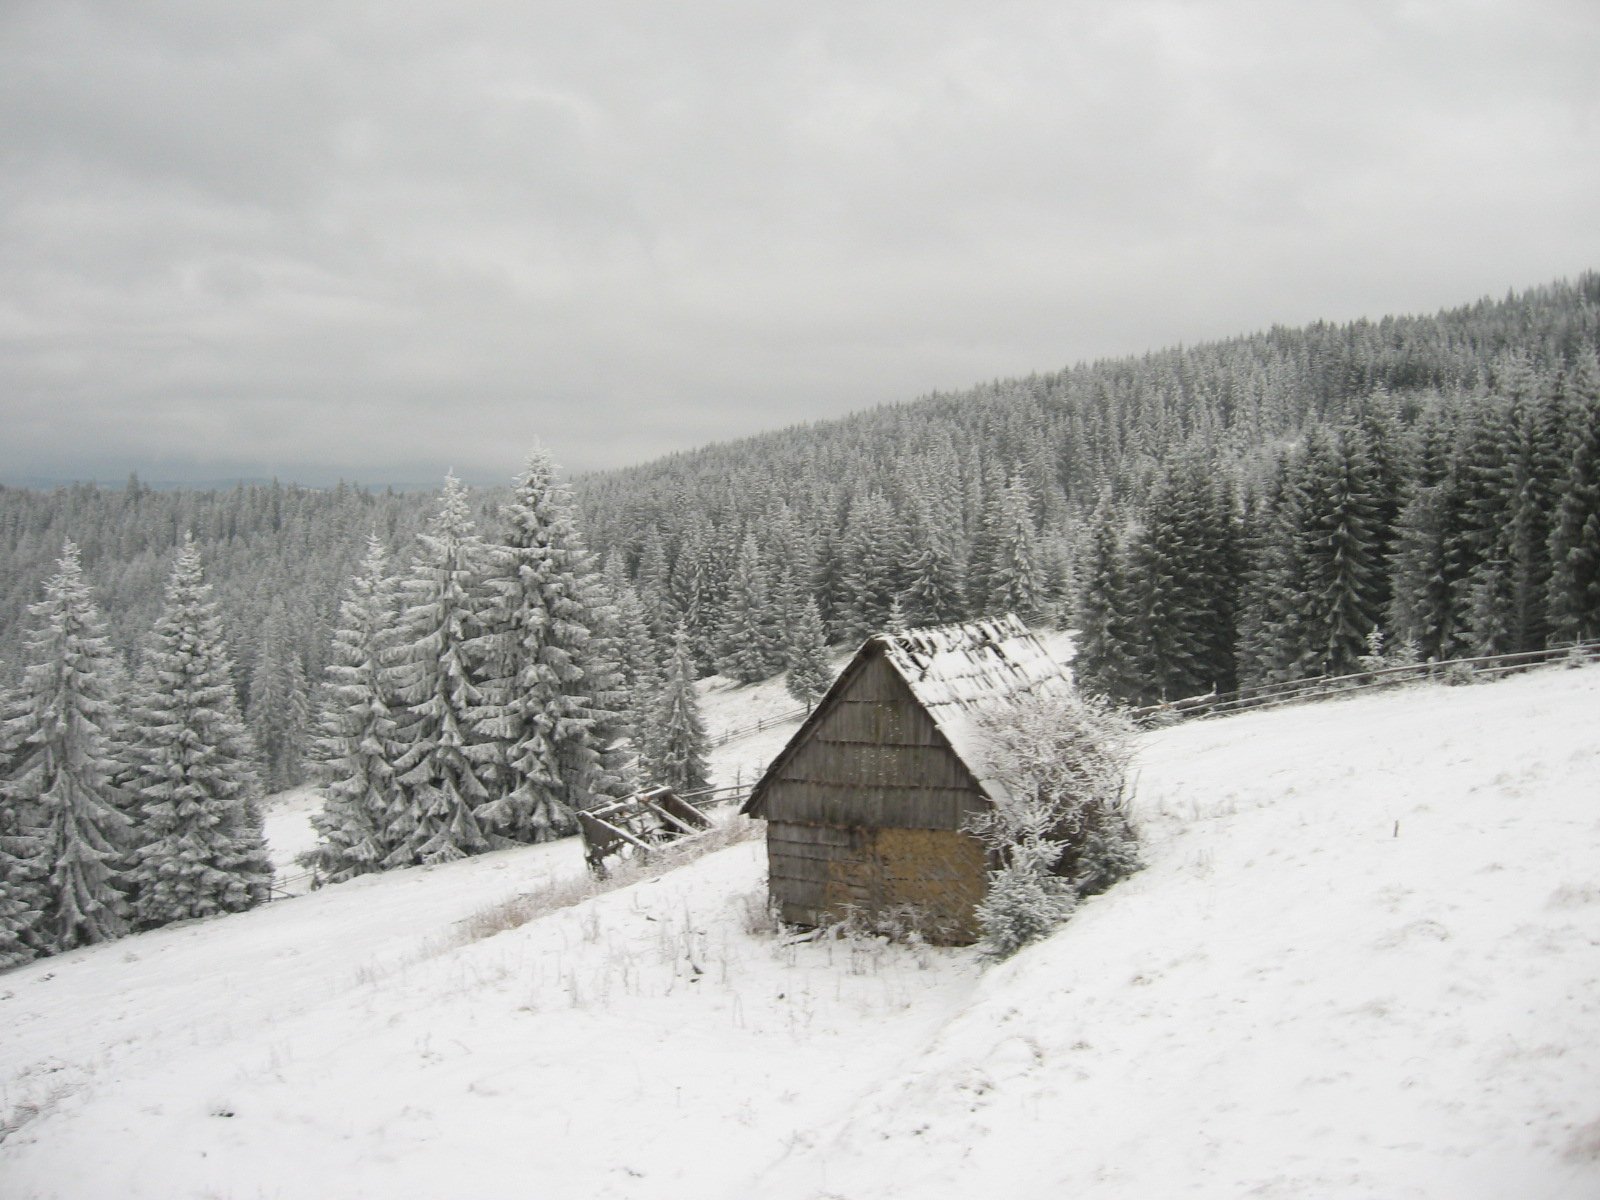 a cabin in a snowy wooded area